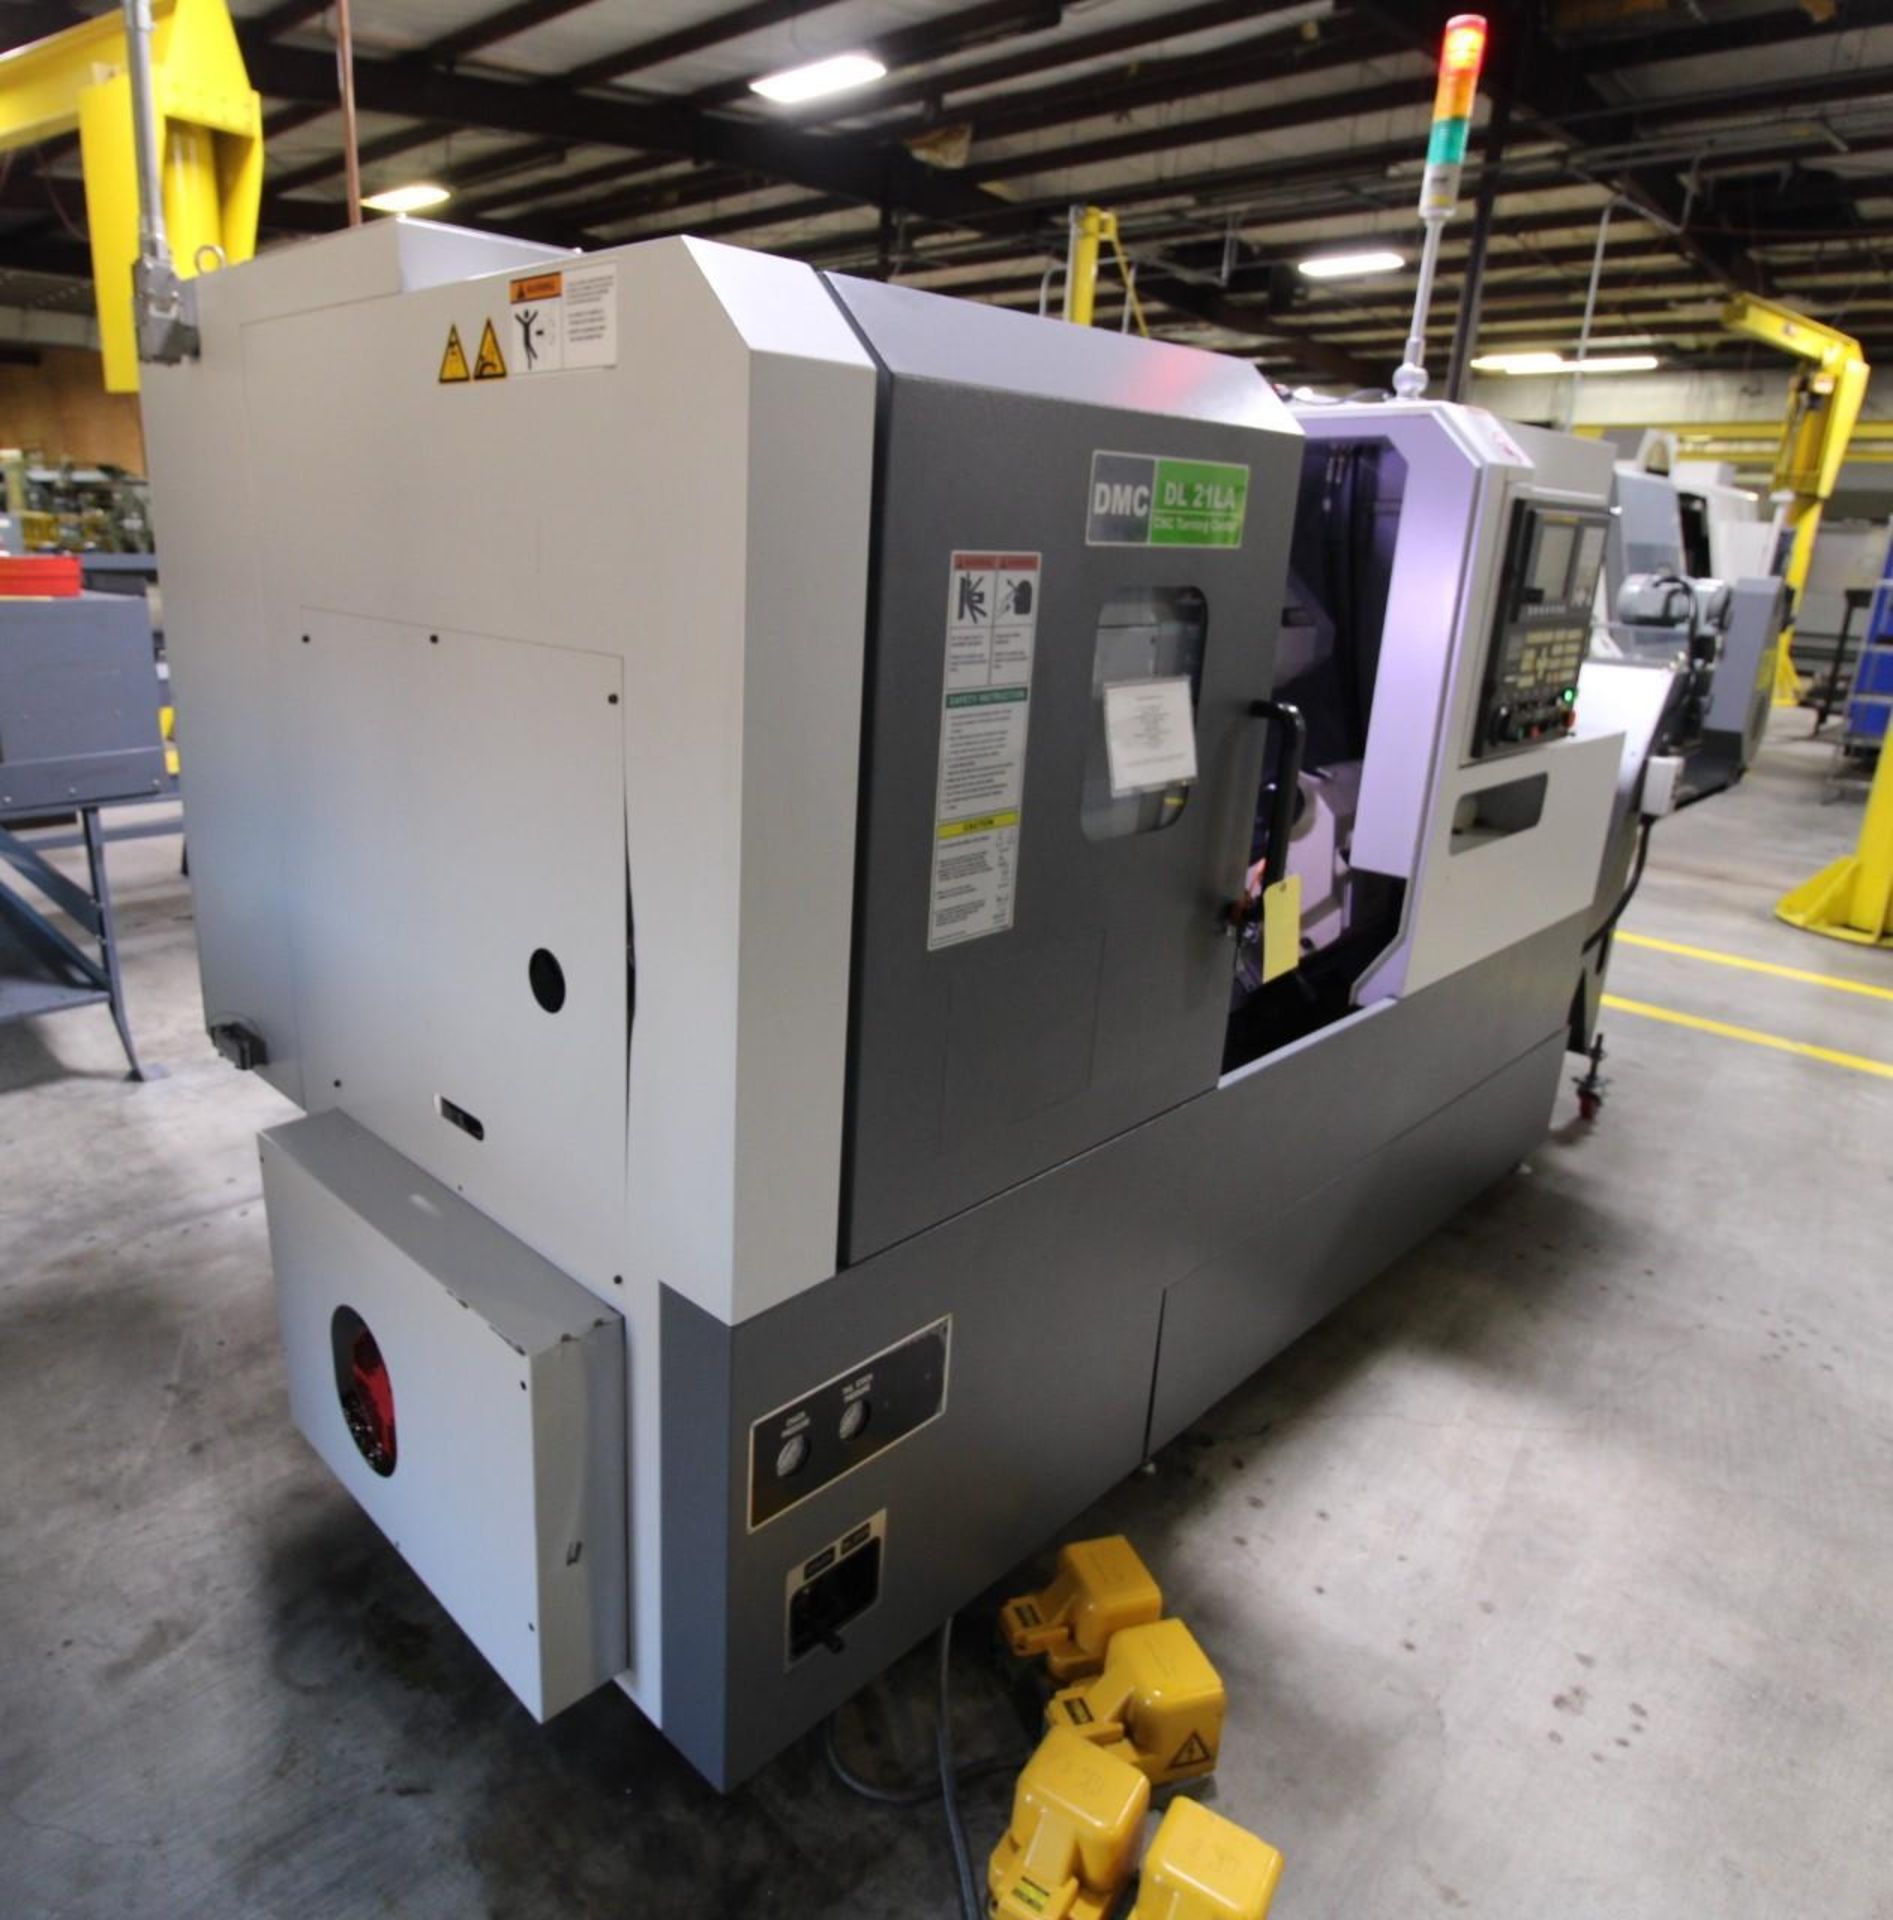 CNC LATHE, DMC MDL. DL-21LA, new 2013, installed as new in 2018, Fanuc Oi-TD control, 8” chuck, 12- - Image 2 of 17